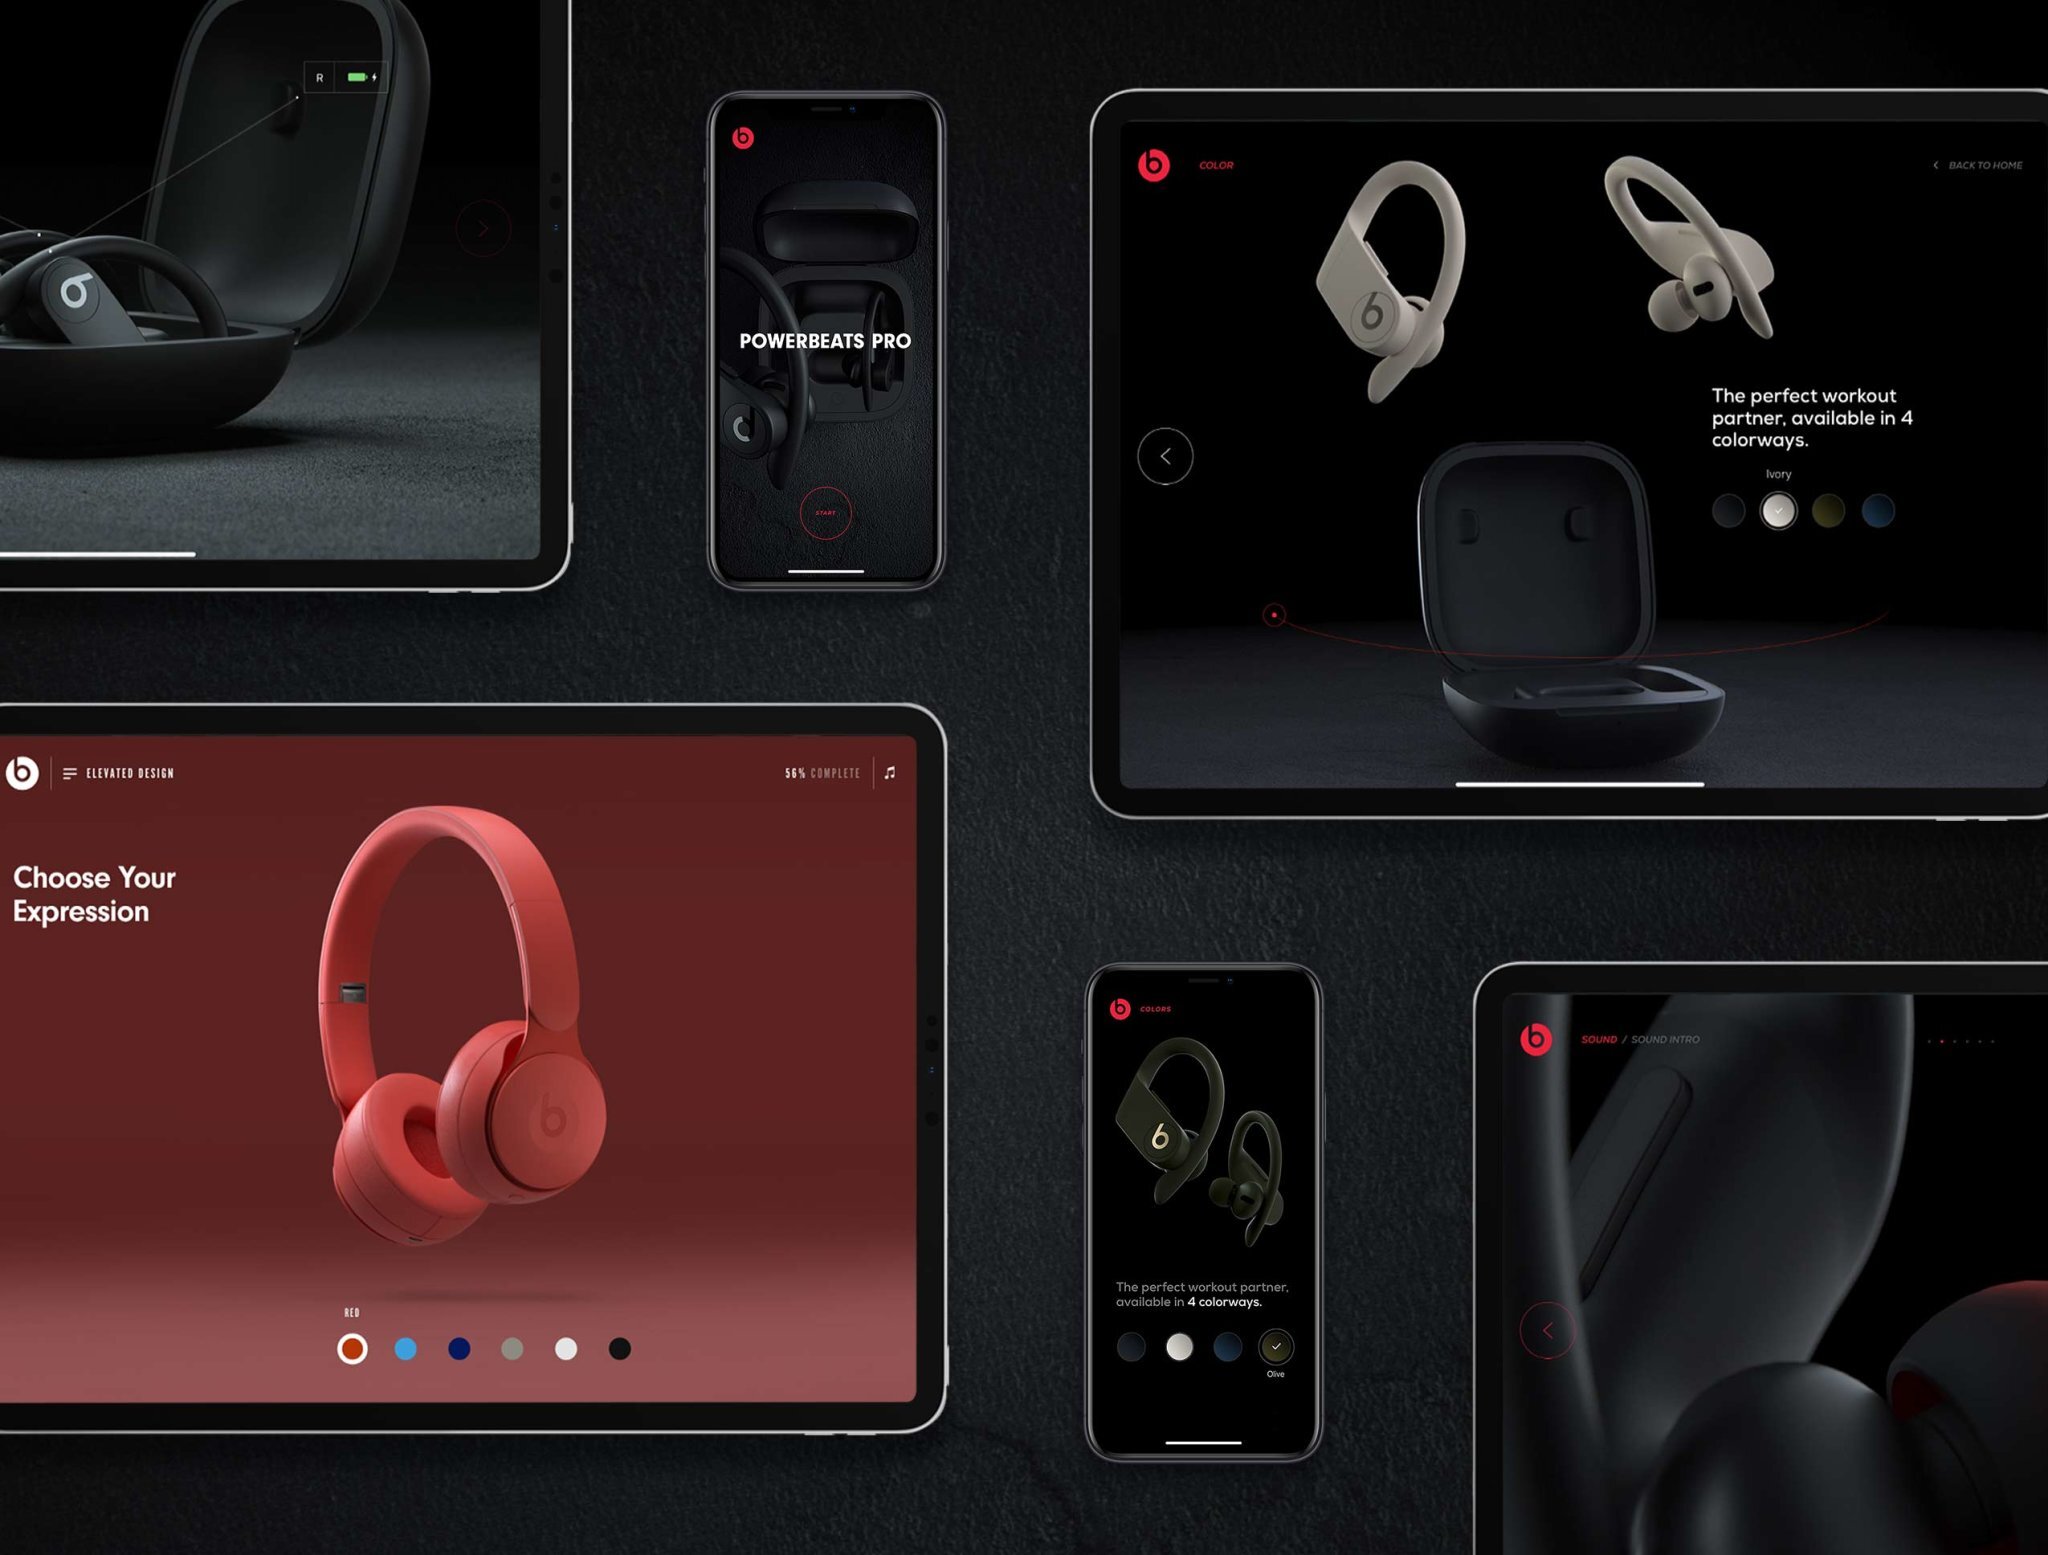 A mosiac of interfaces showing features and color options for the Solo Pro 3 and Powerbeats Pro.